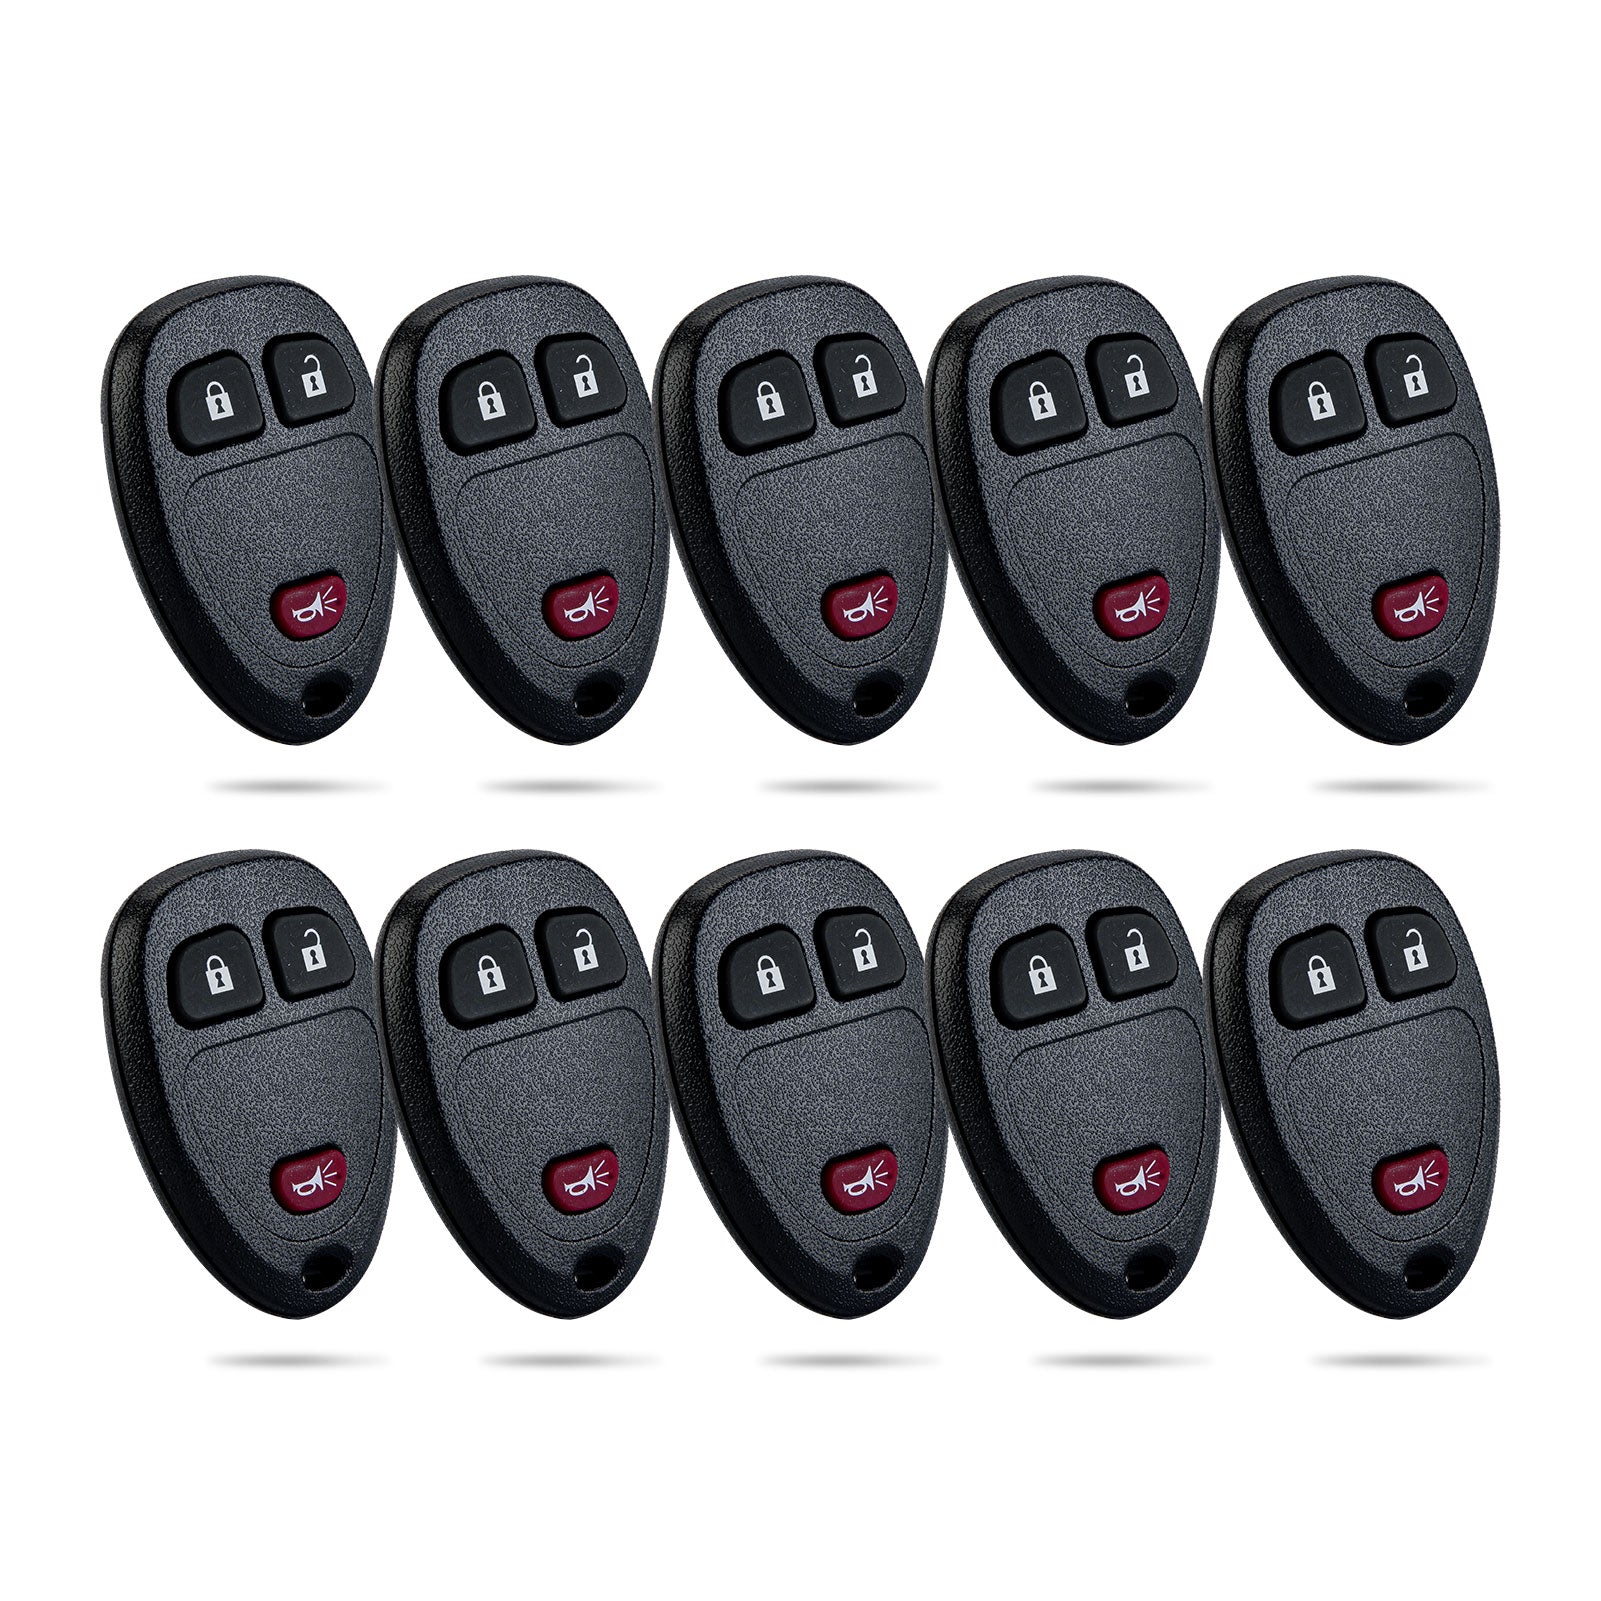 Car Key Fob Replacement for 2007-2009 Equinox 3 Button OUC60270, OUC60220 KR-C3RD